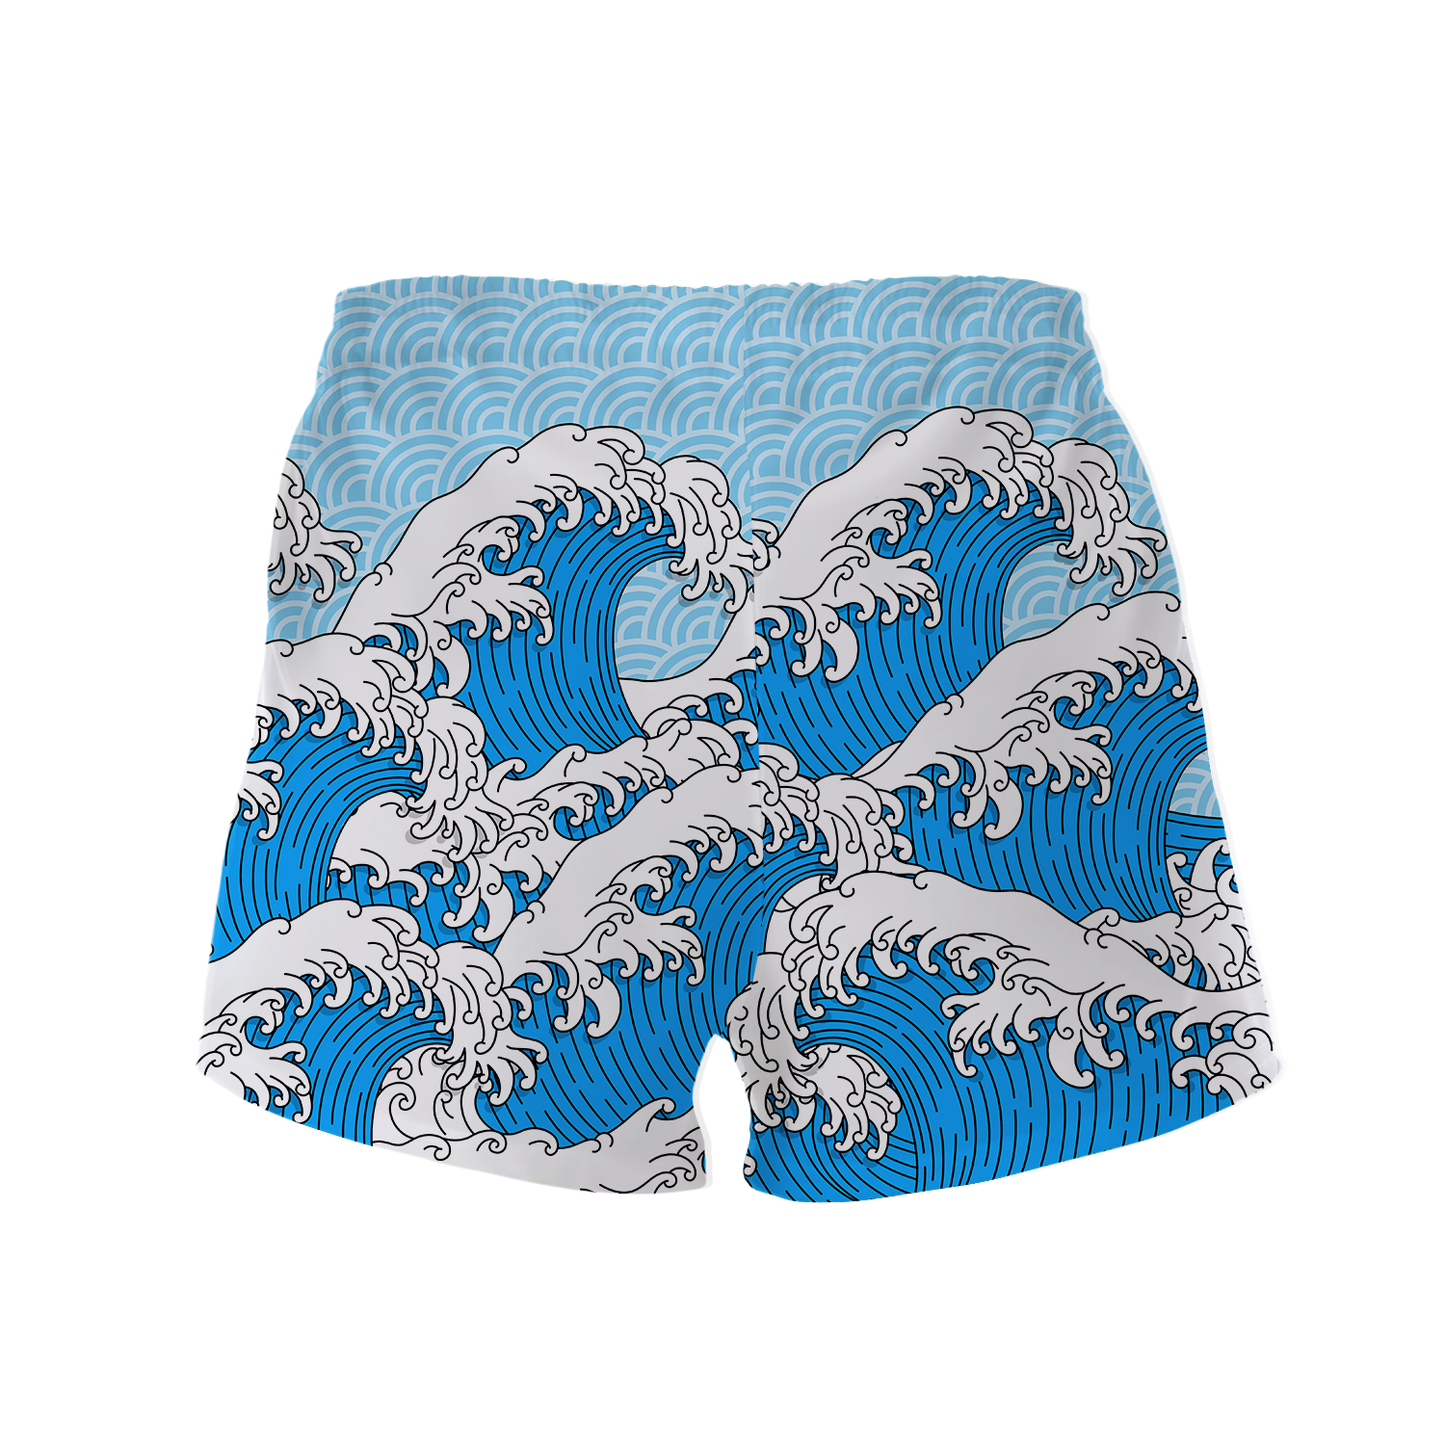 Retro Waves All Over Print Women's Shorts